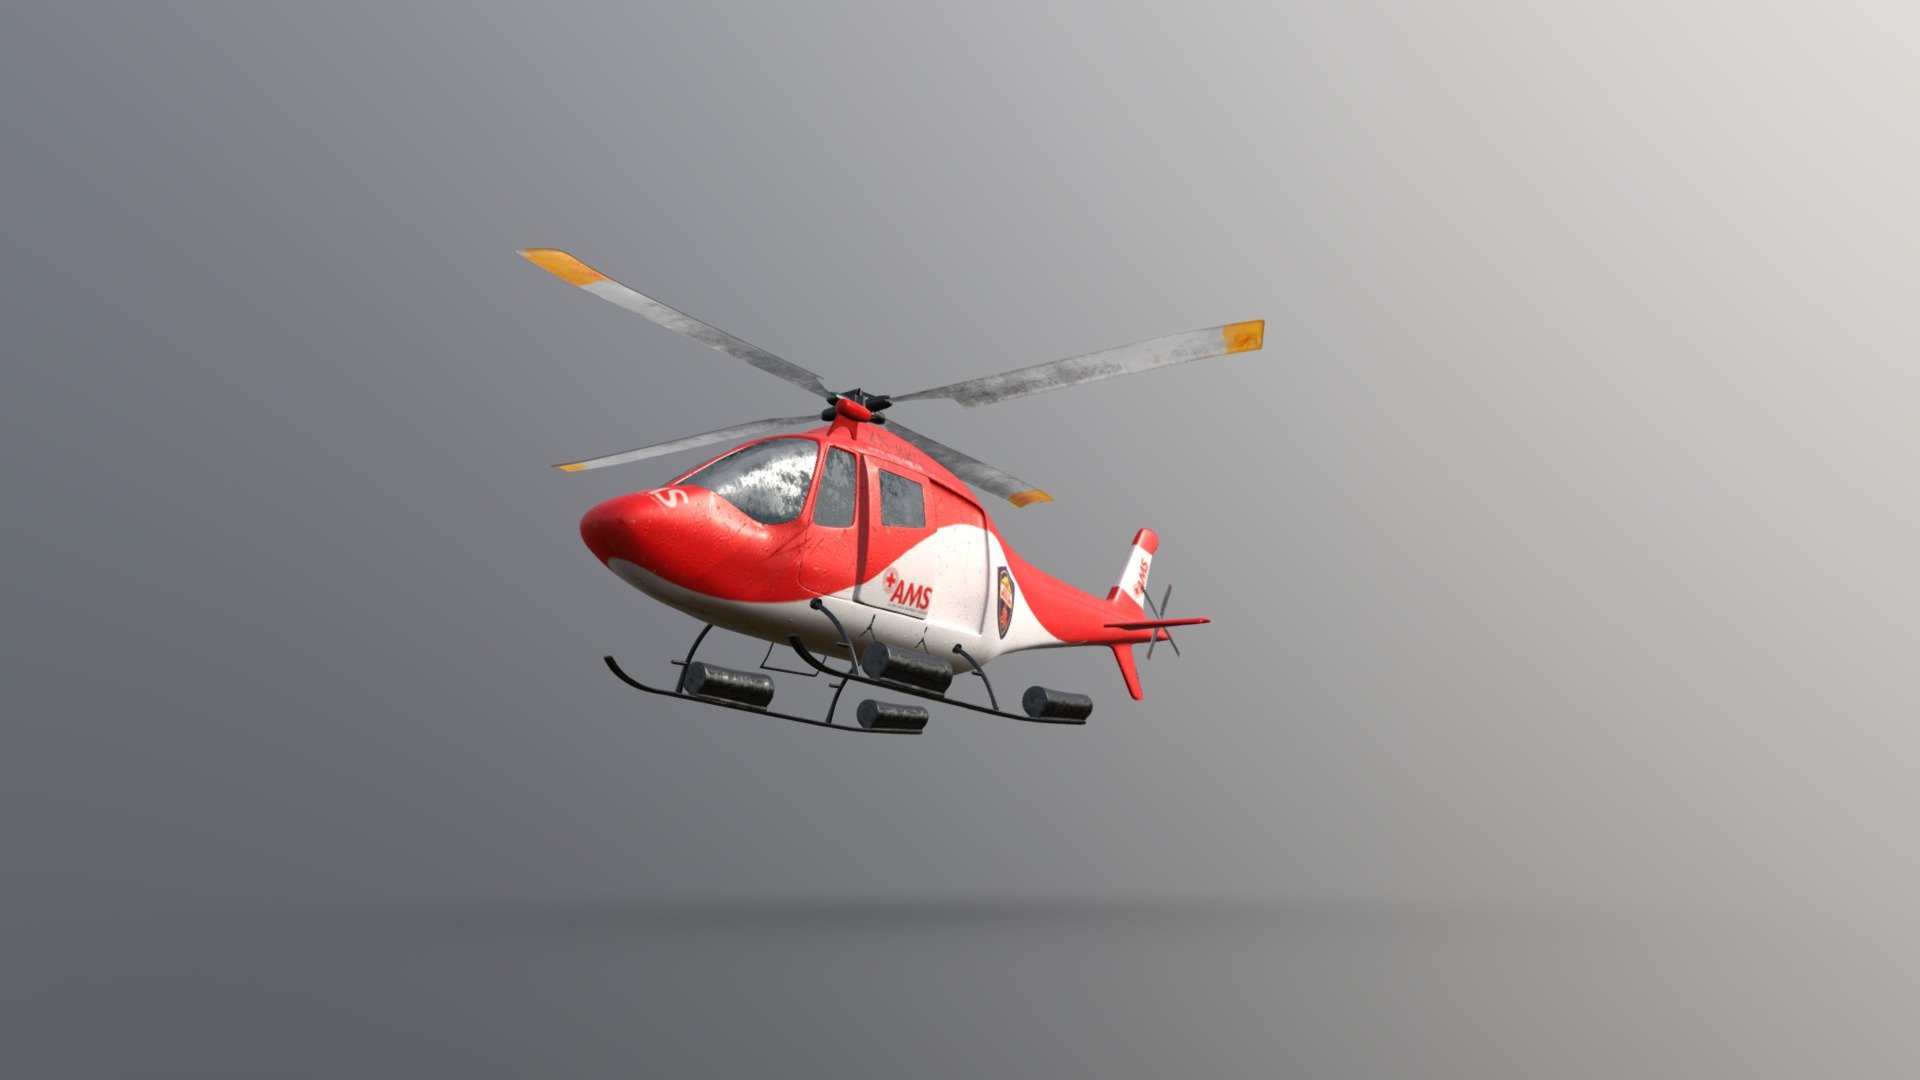 A copy of an Australian red cross helicopter - Red Cross Agusta 119 EMS Helicopter - Buy Royalty Free 3D model by ireneruthsch 3d model